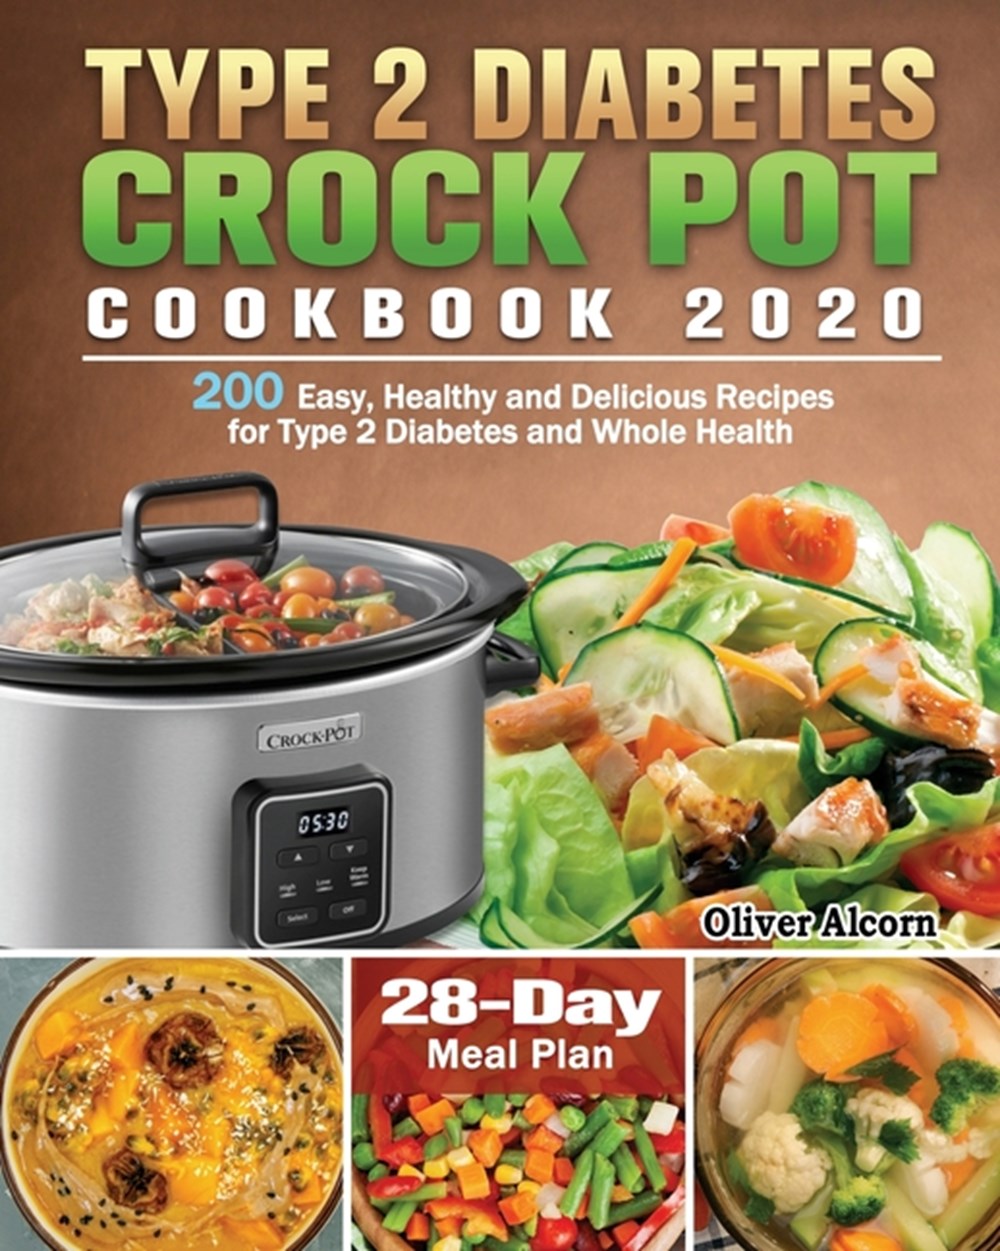 Type 2 Diabetes Crock Pot Cookbook 2020: 200 Easy, Healthy and Delicious Recipes for Type 2 Diabetes